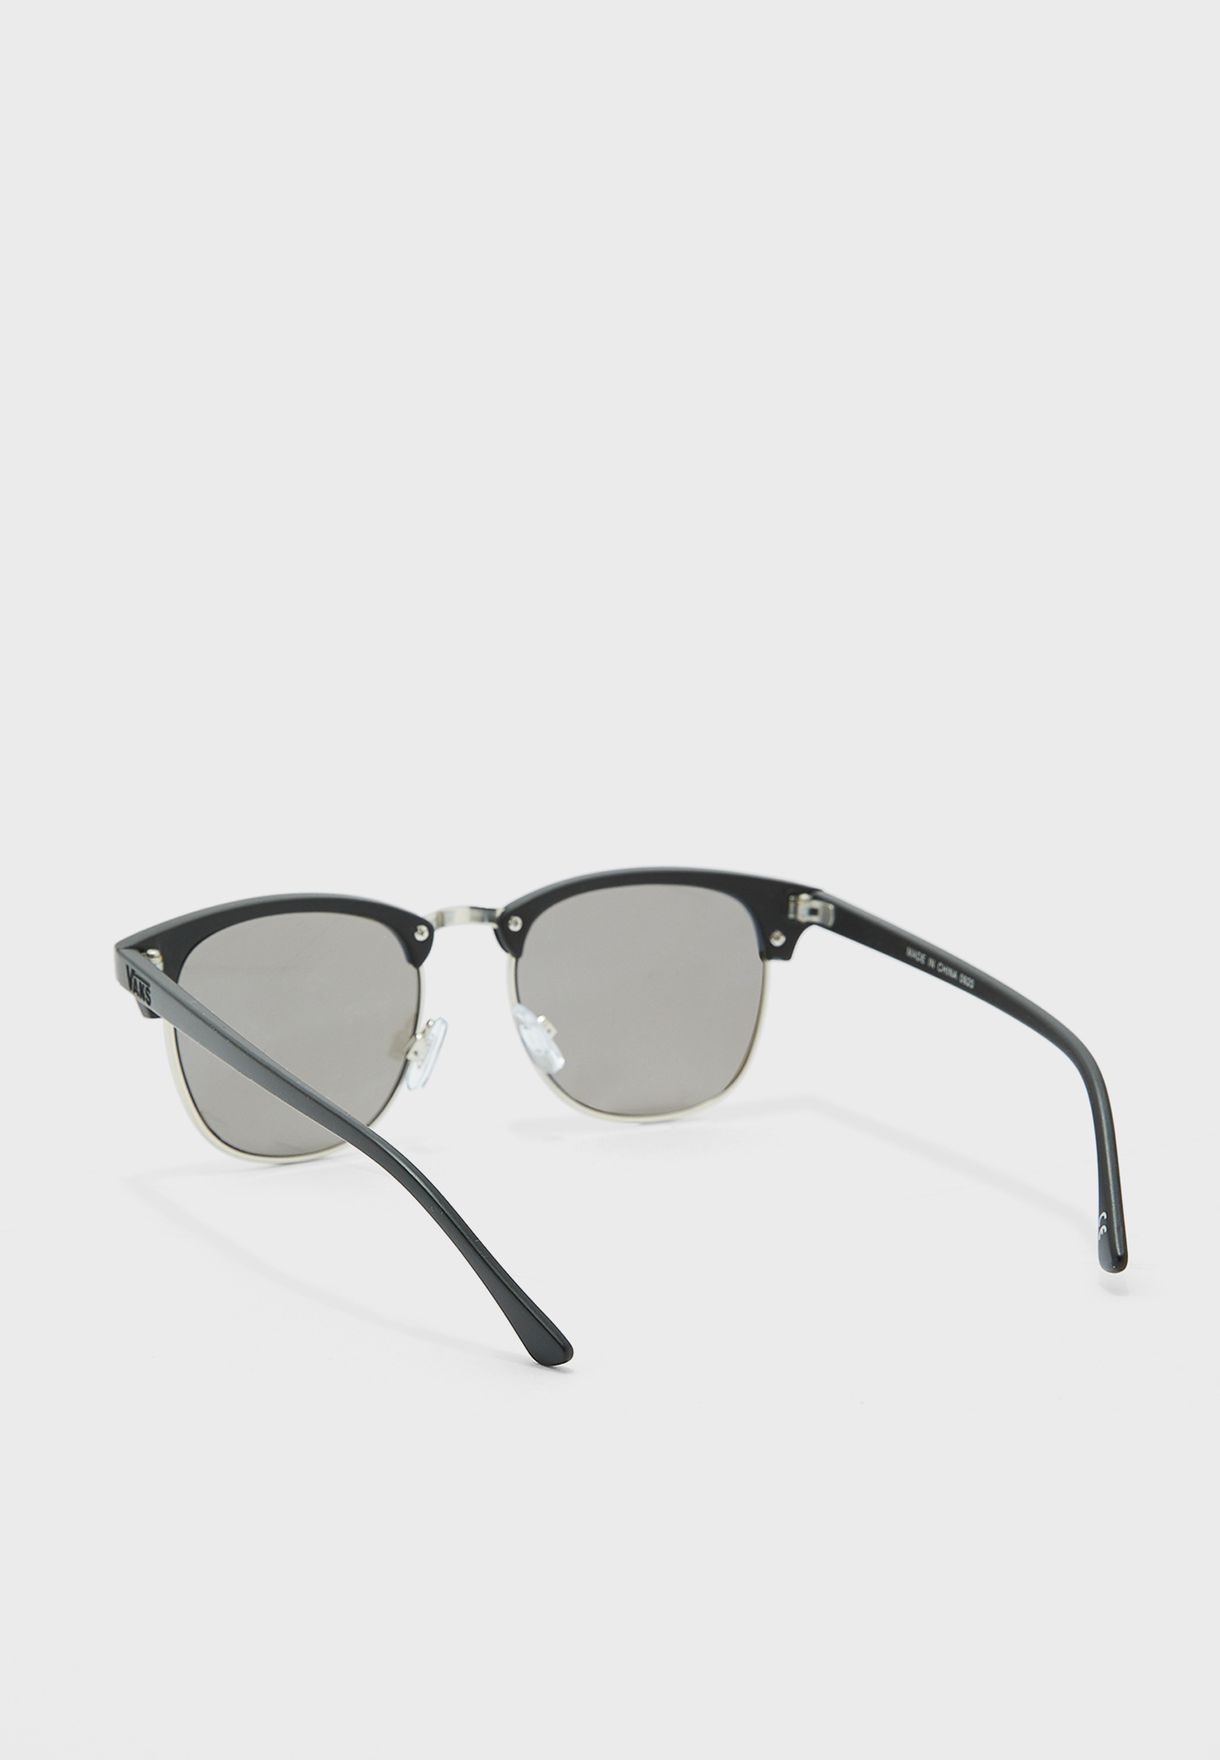 Dunville Shades Sunglasses